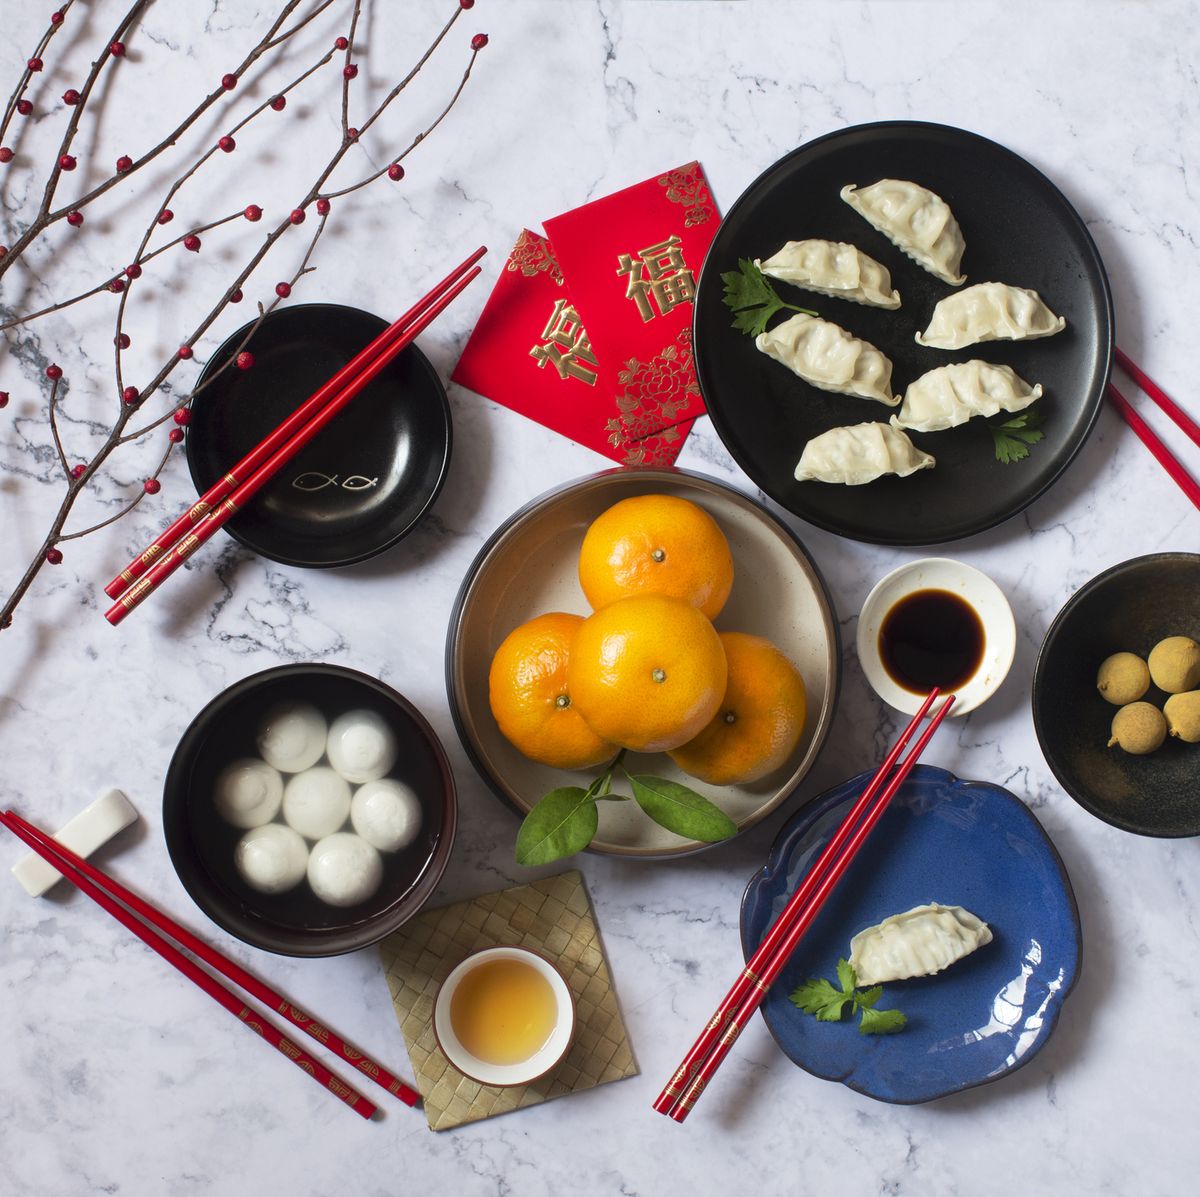 Easy Chinese New Year Recipes - The New York Times